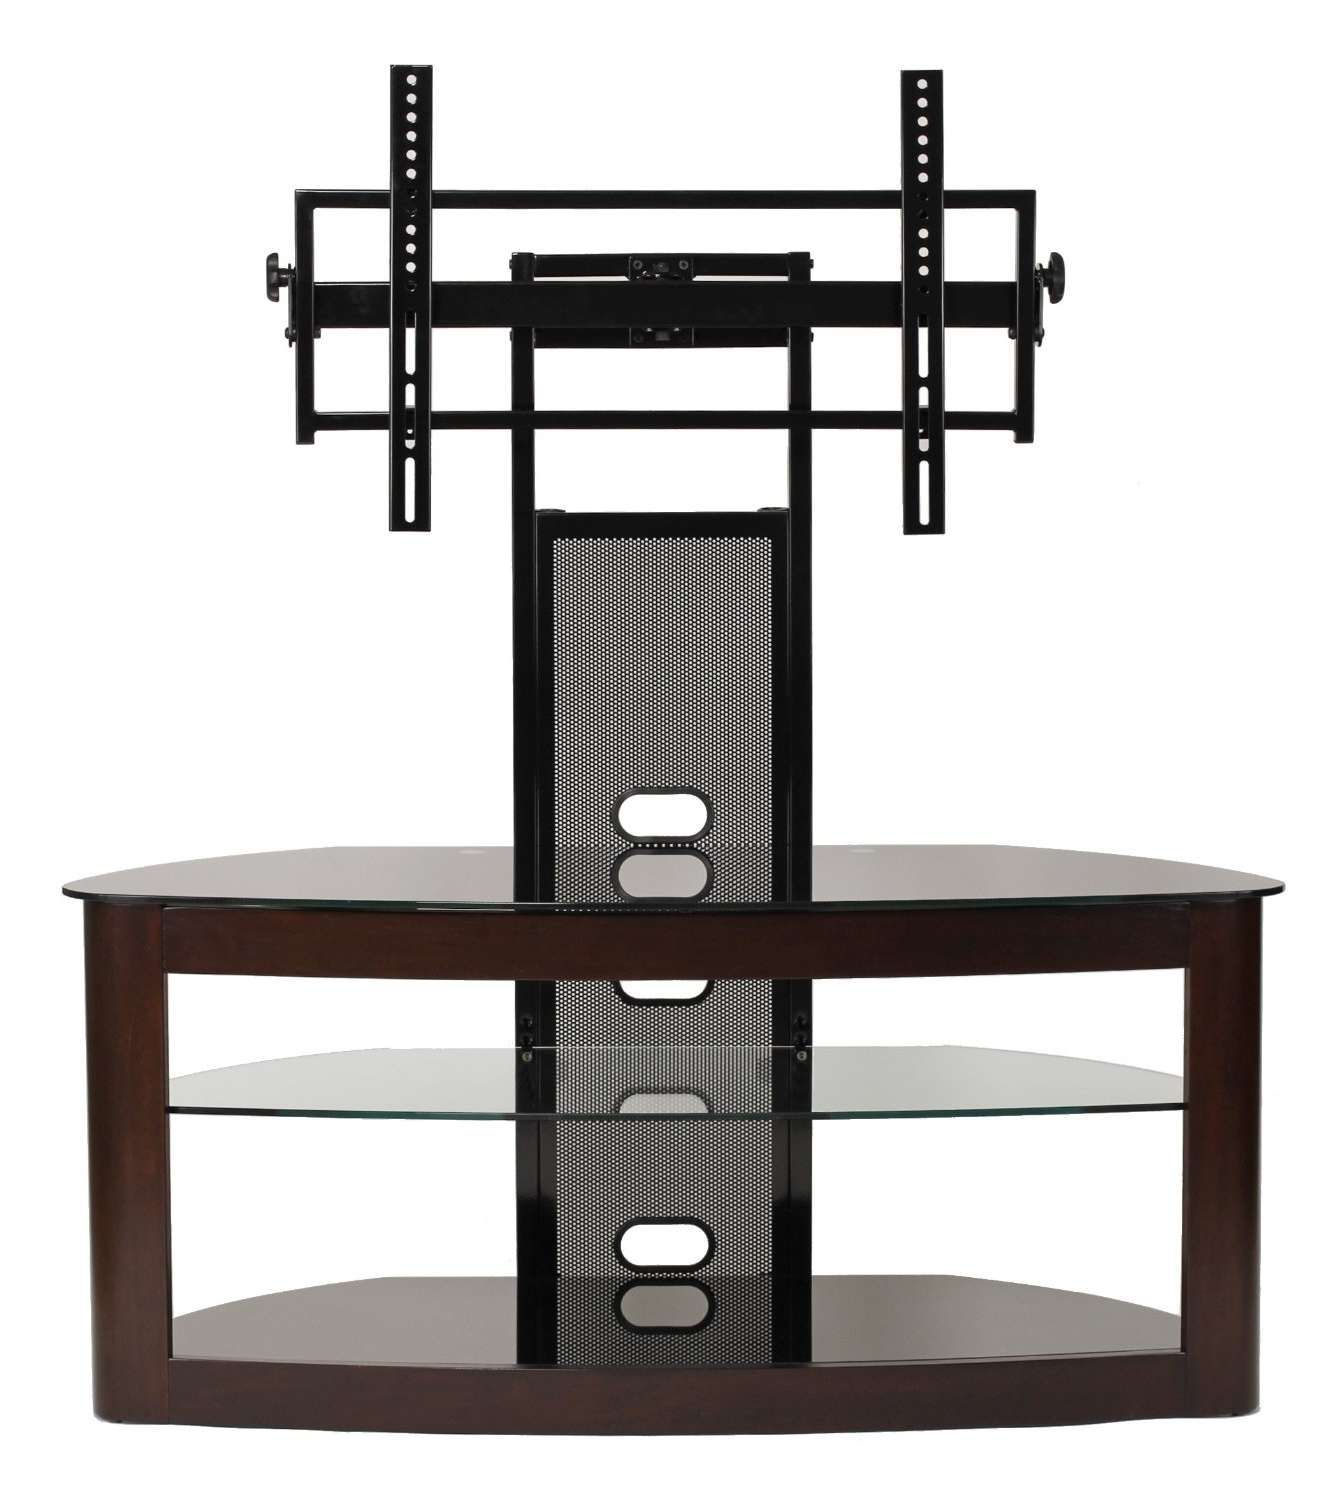 Furnitures : 391447a6146c 1 Inch Tv Stand With Mount Furnitures Pertaining To 65 Inch Tv Stands With Integrated Mount (View 4 of 15)